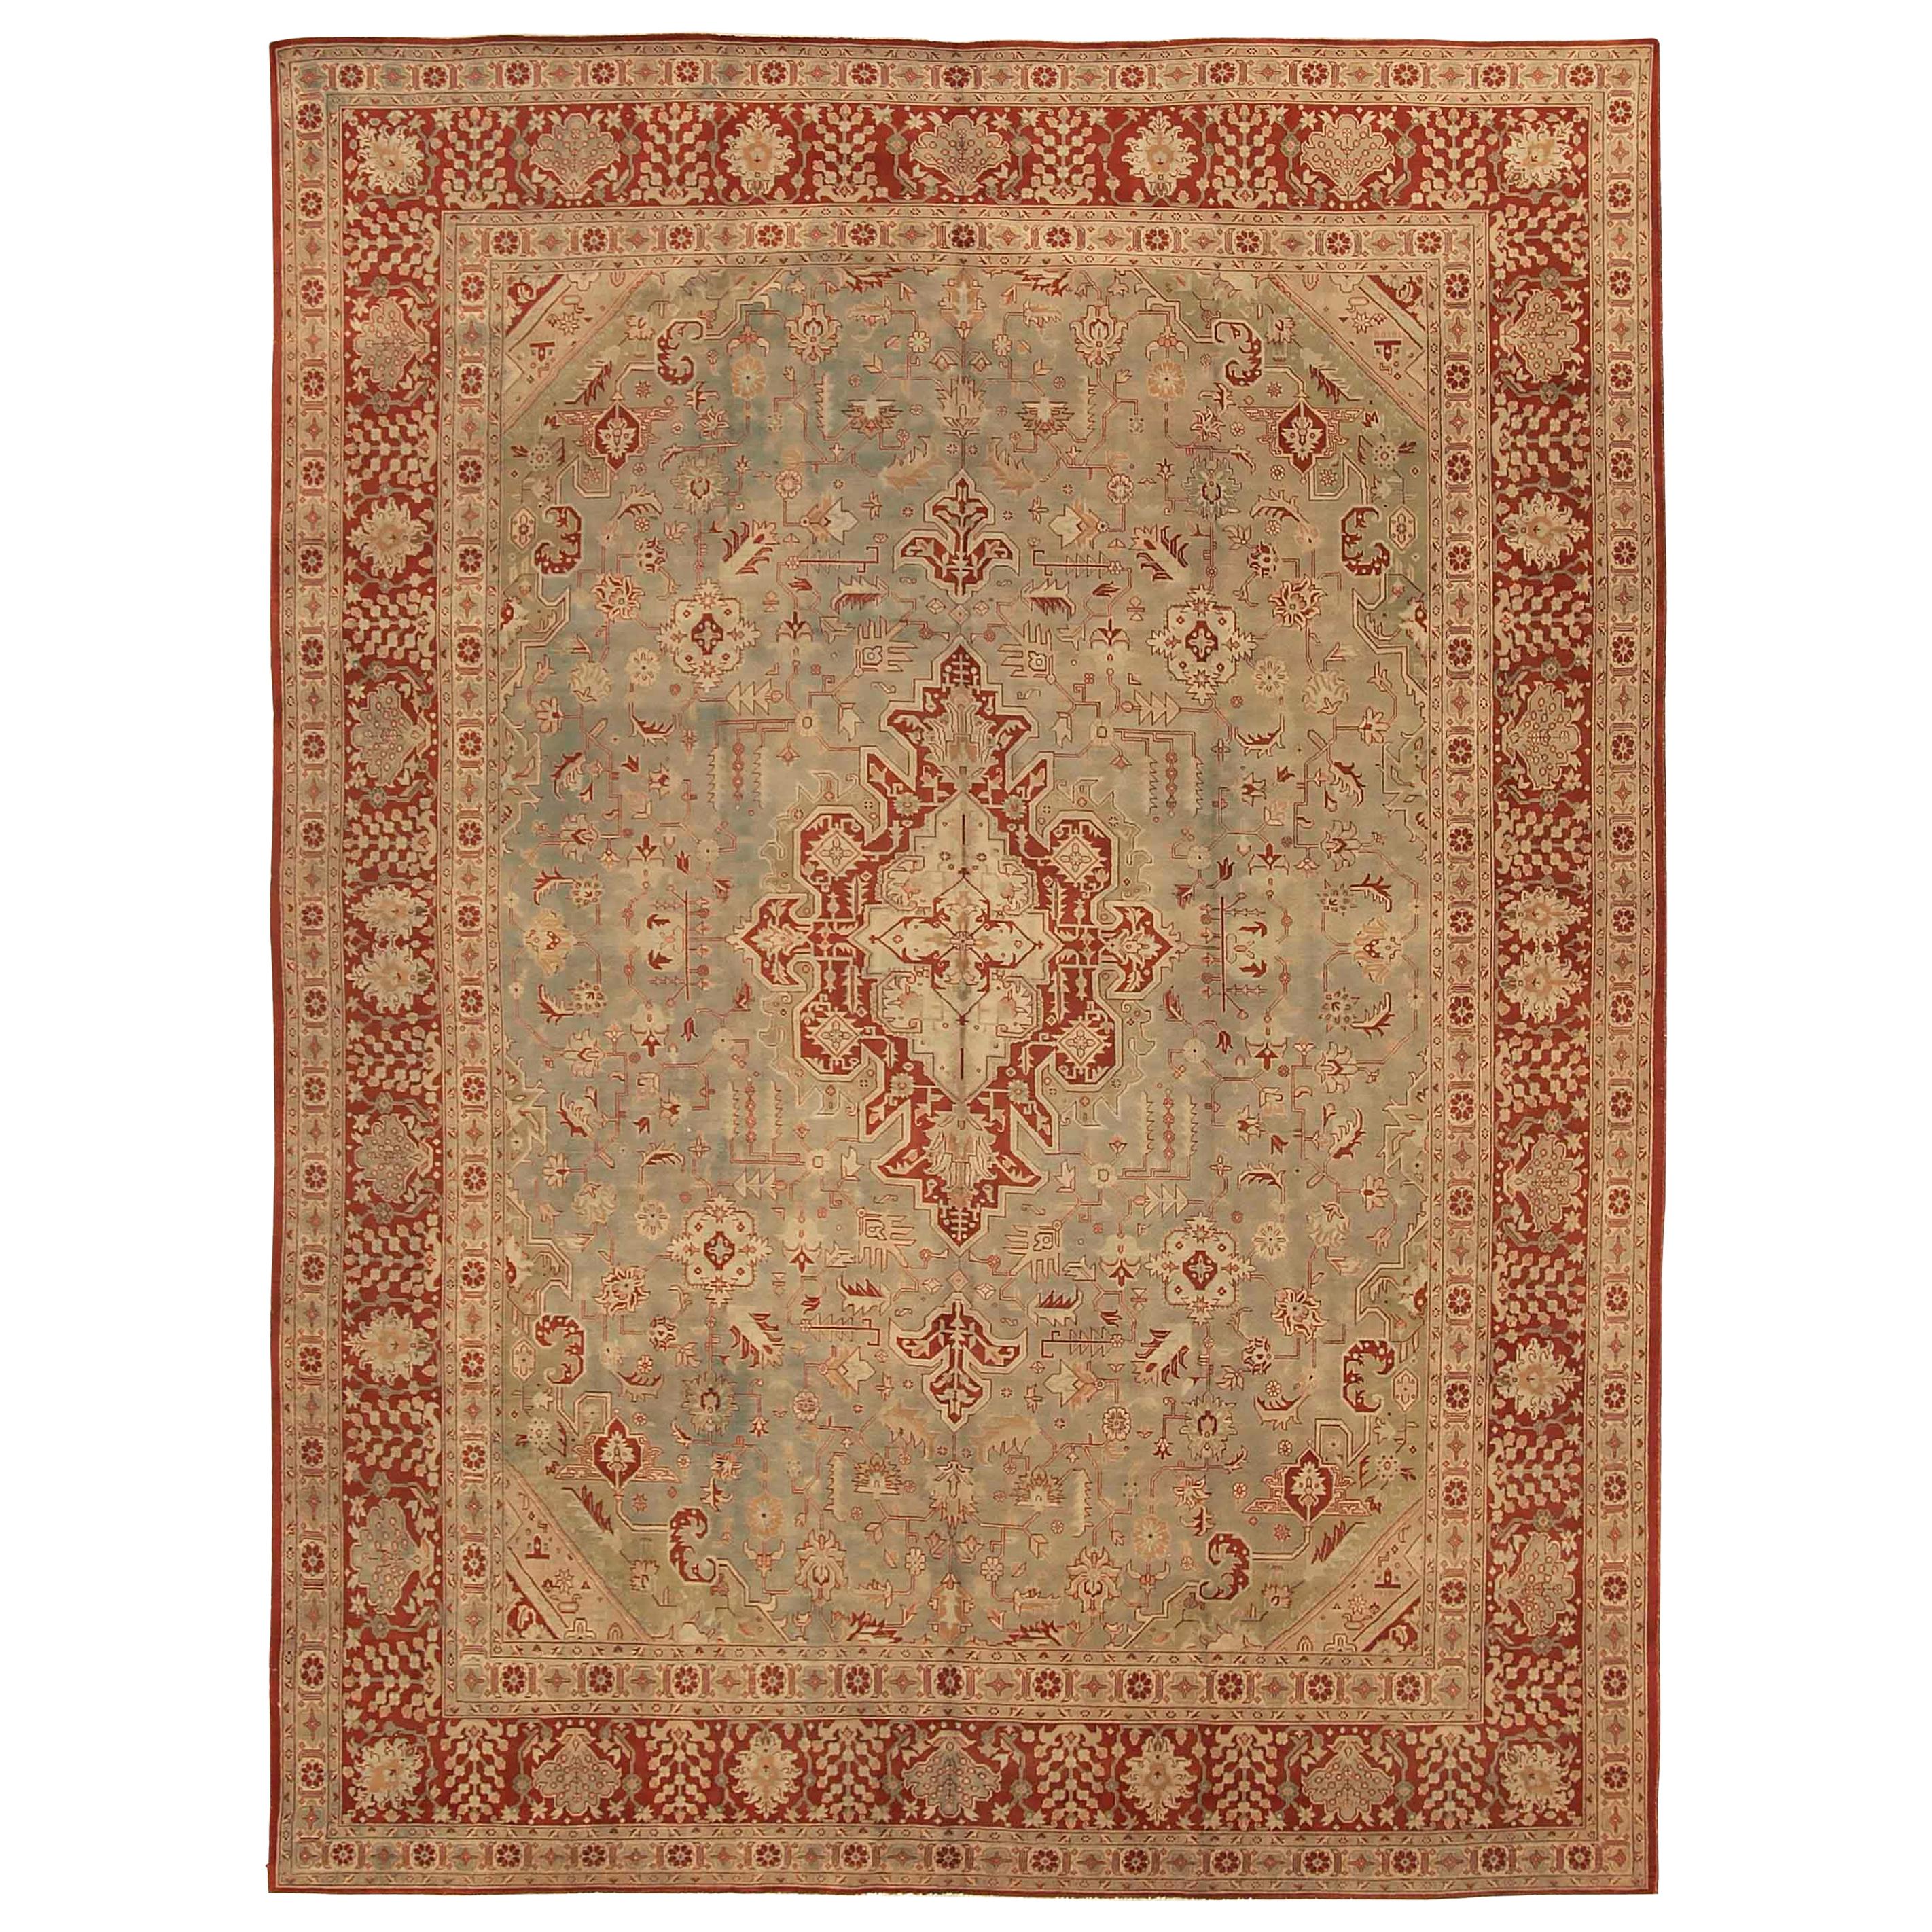 Antique Persian Tabriz Rug with Floral Details on Red/Beige Field For Sale